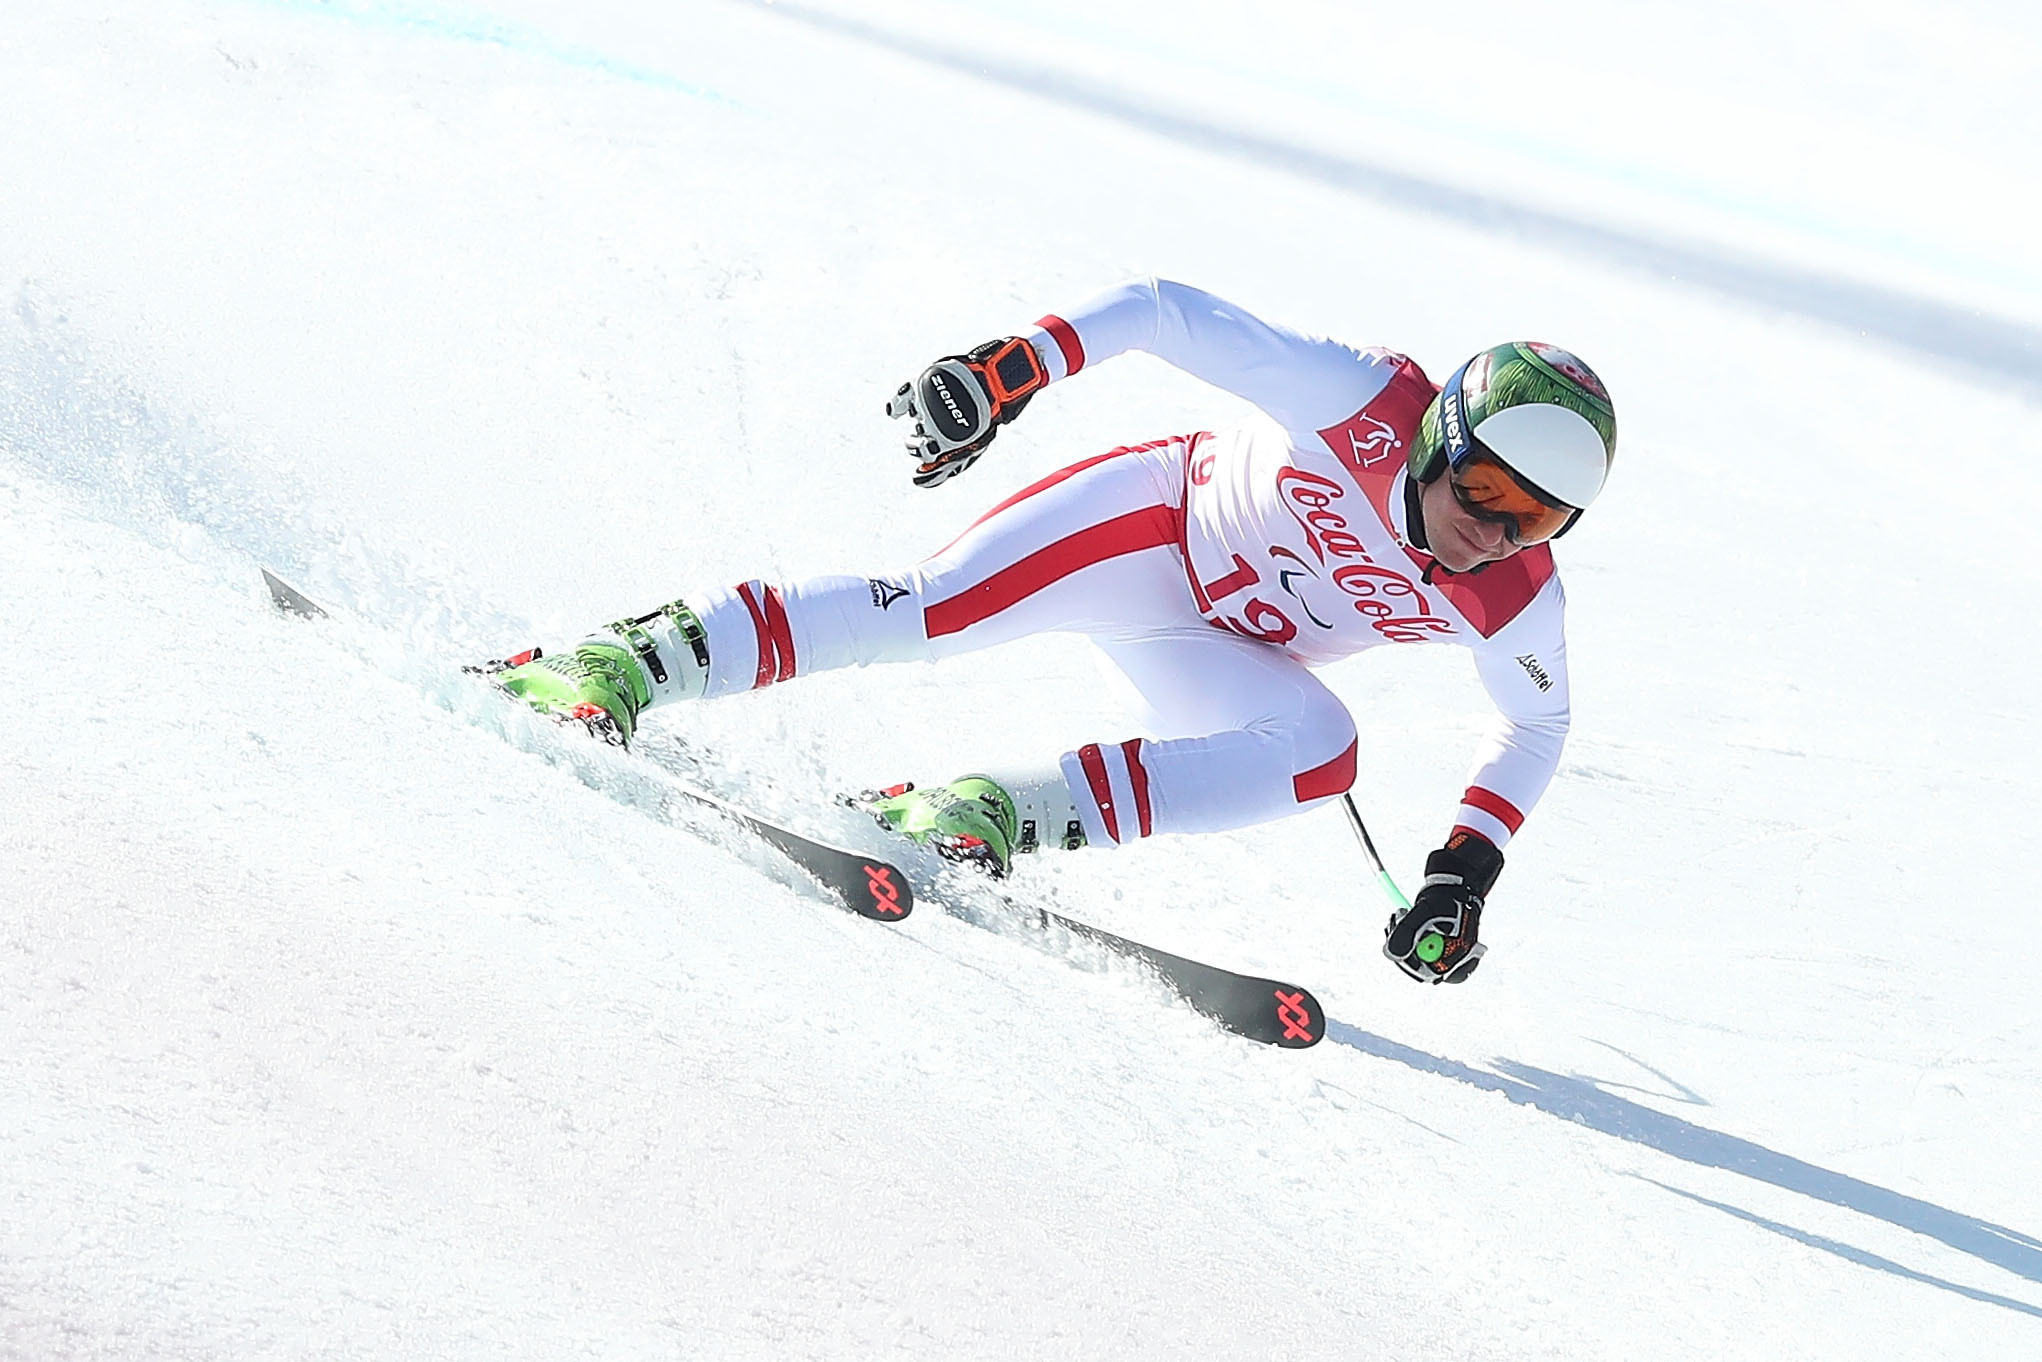 Salcher back to winning ways with downhill gold at World Alpine Skiing World Cup